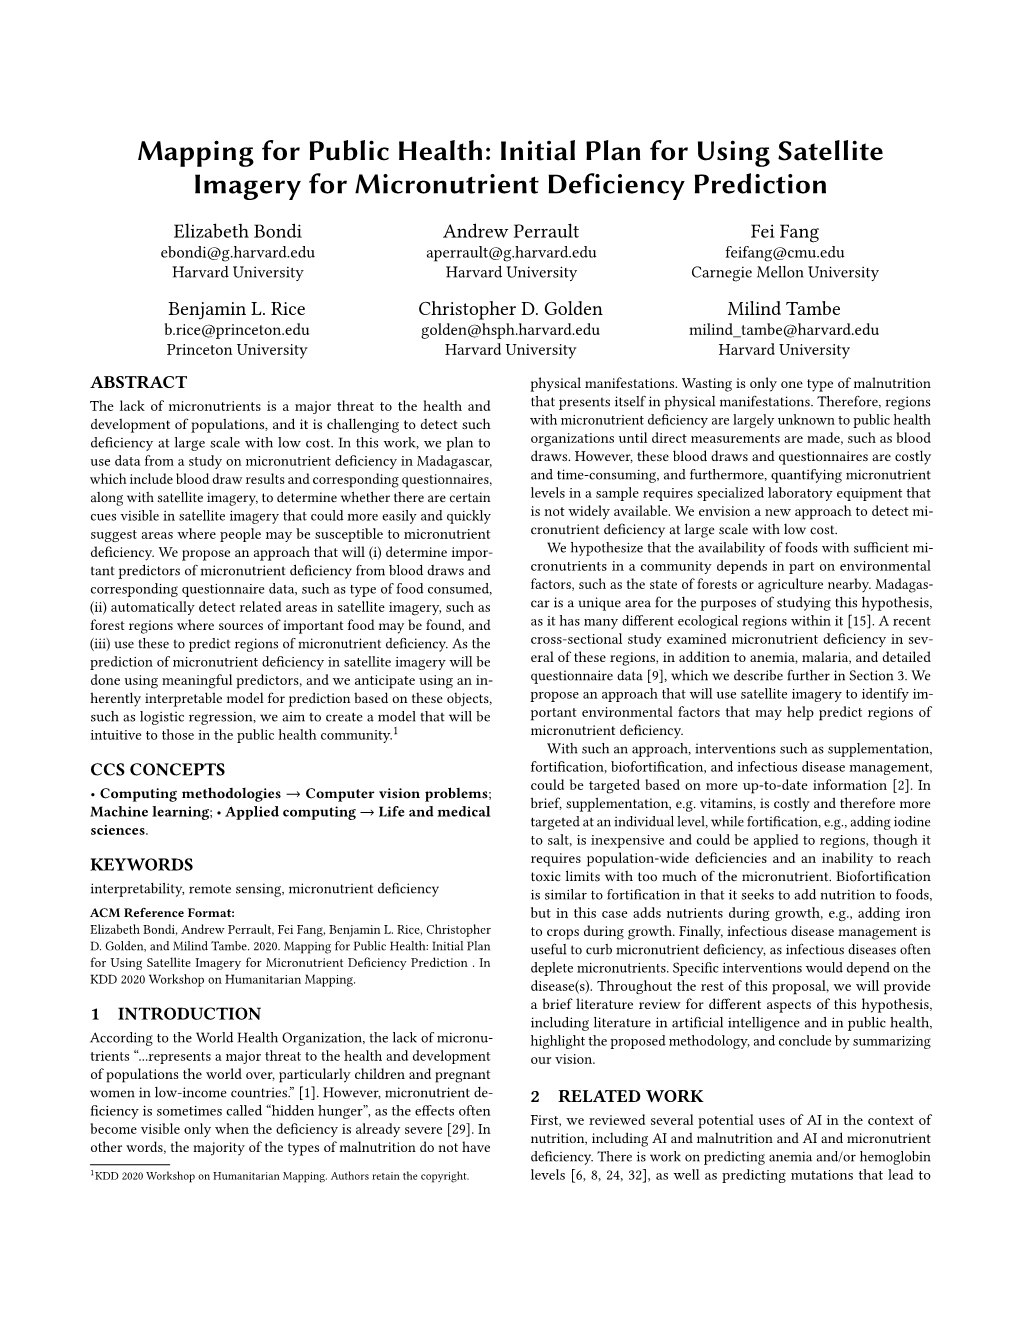 Mapping for Public Health: Initial Plan for Using Satellite Imagery for Micronutrient Deficiency Prediction